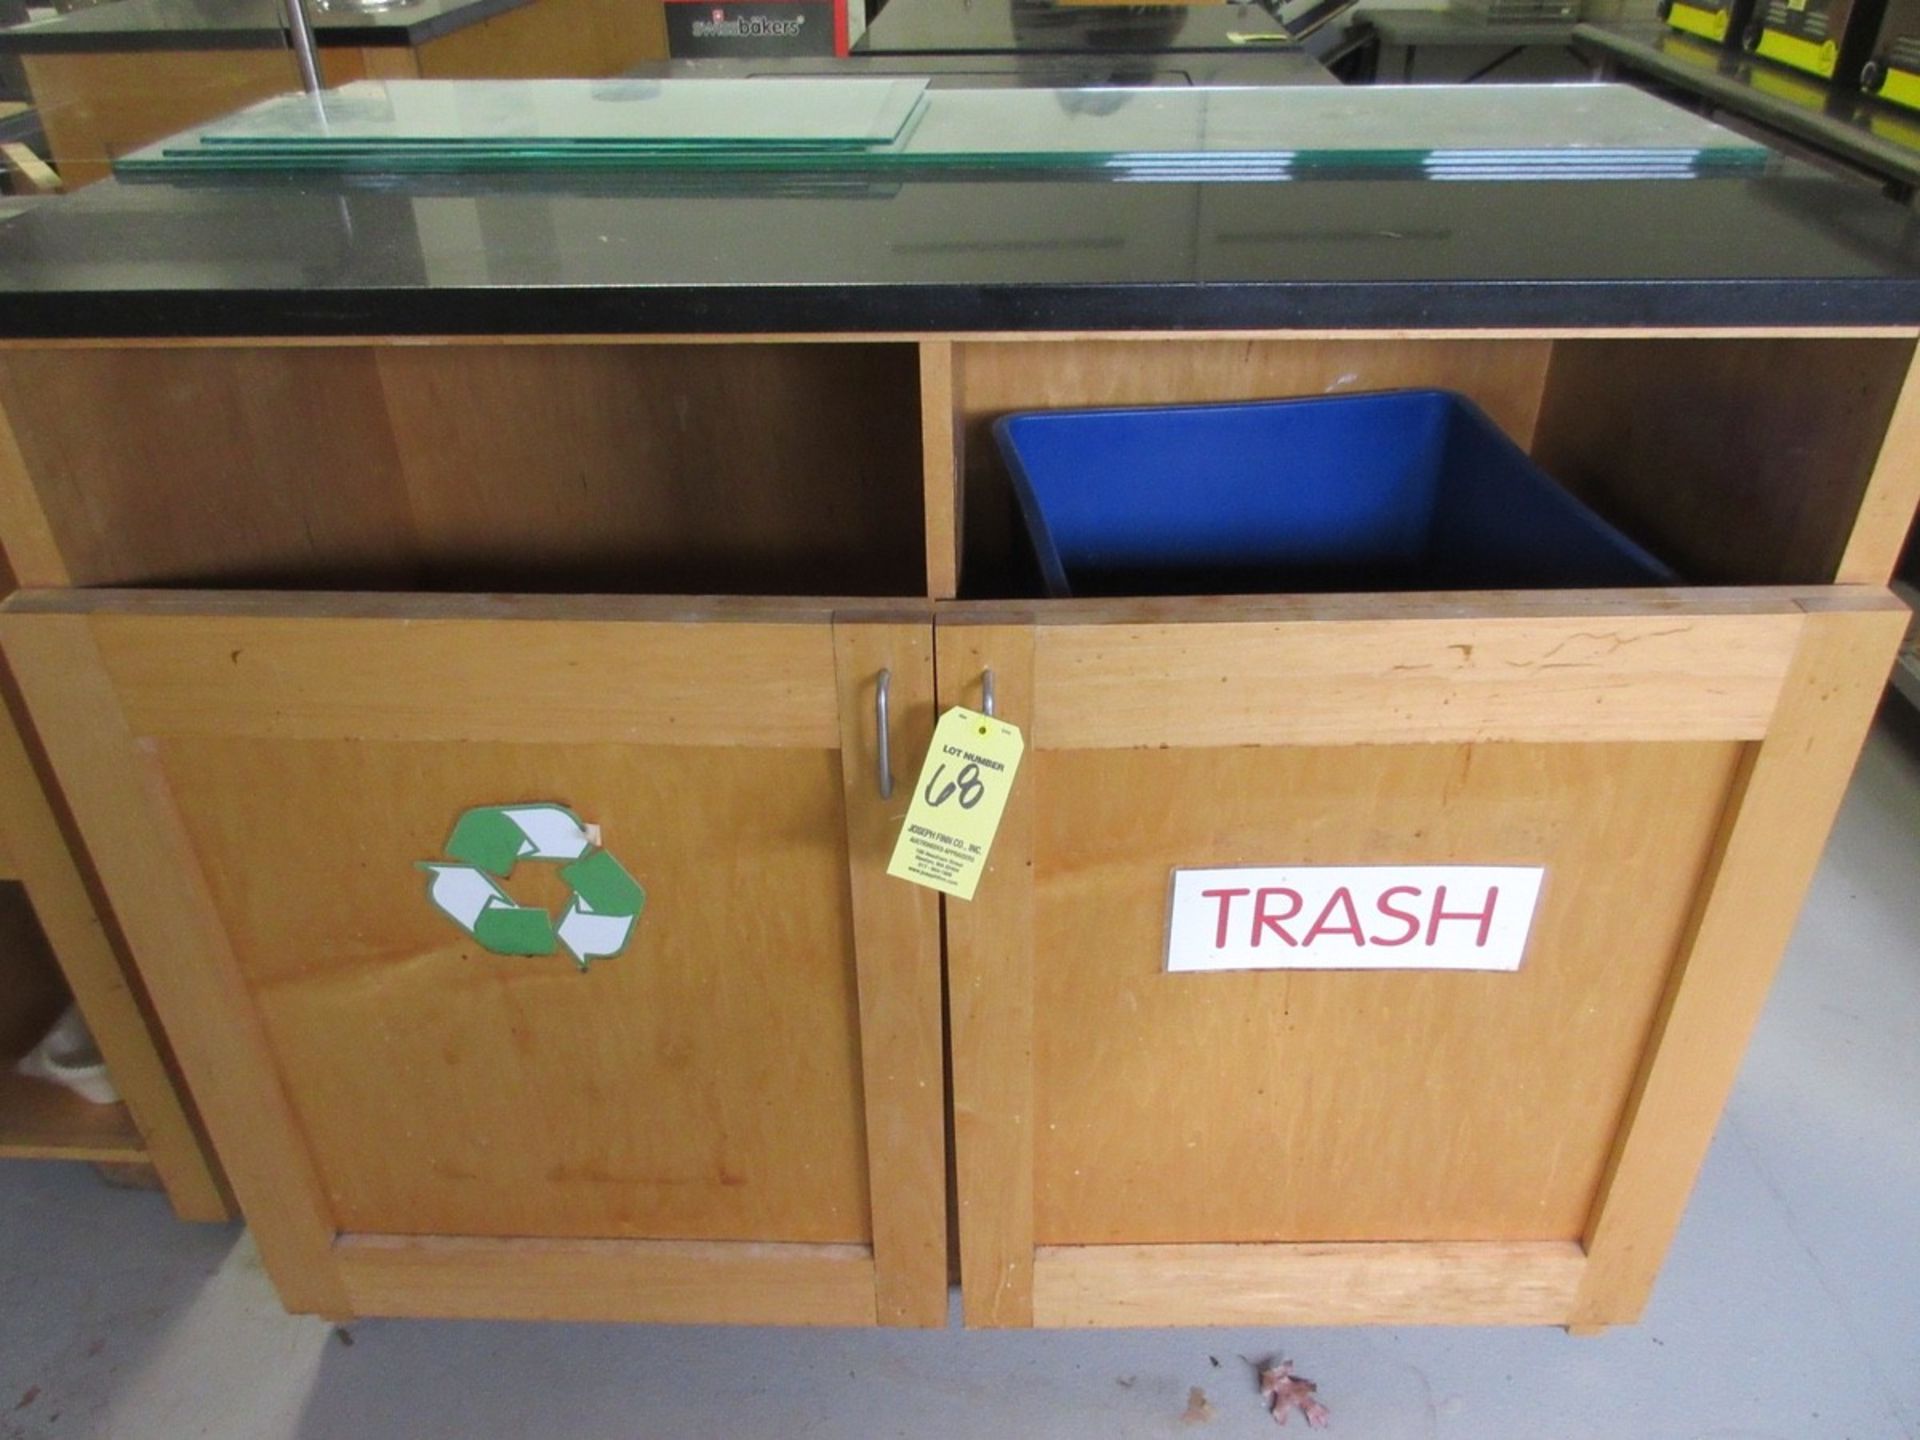 (1) Station Trash Receptacle Counter 53"" x 26"" x 43"" H